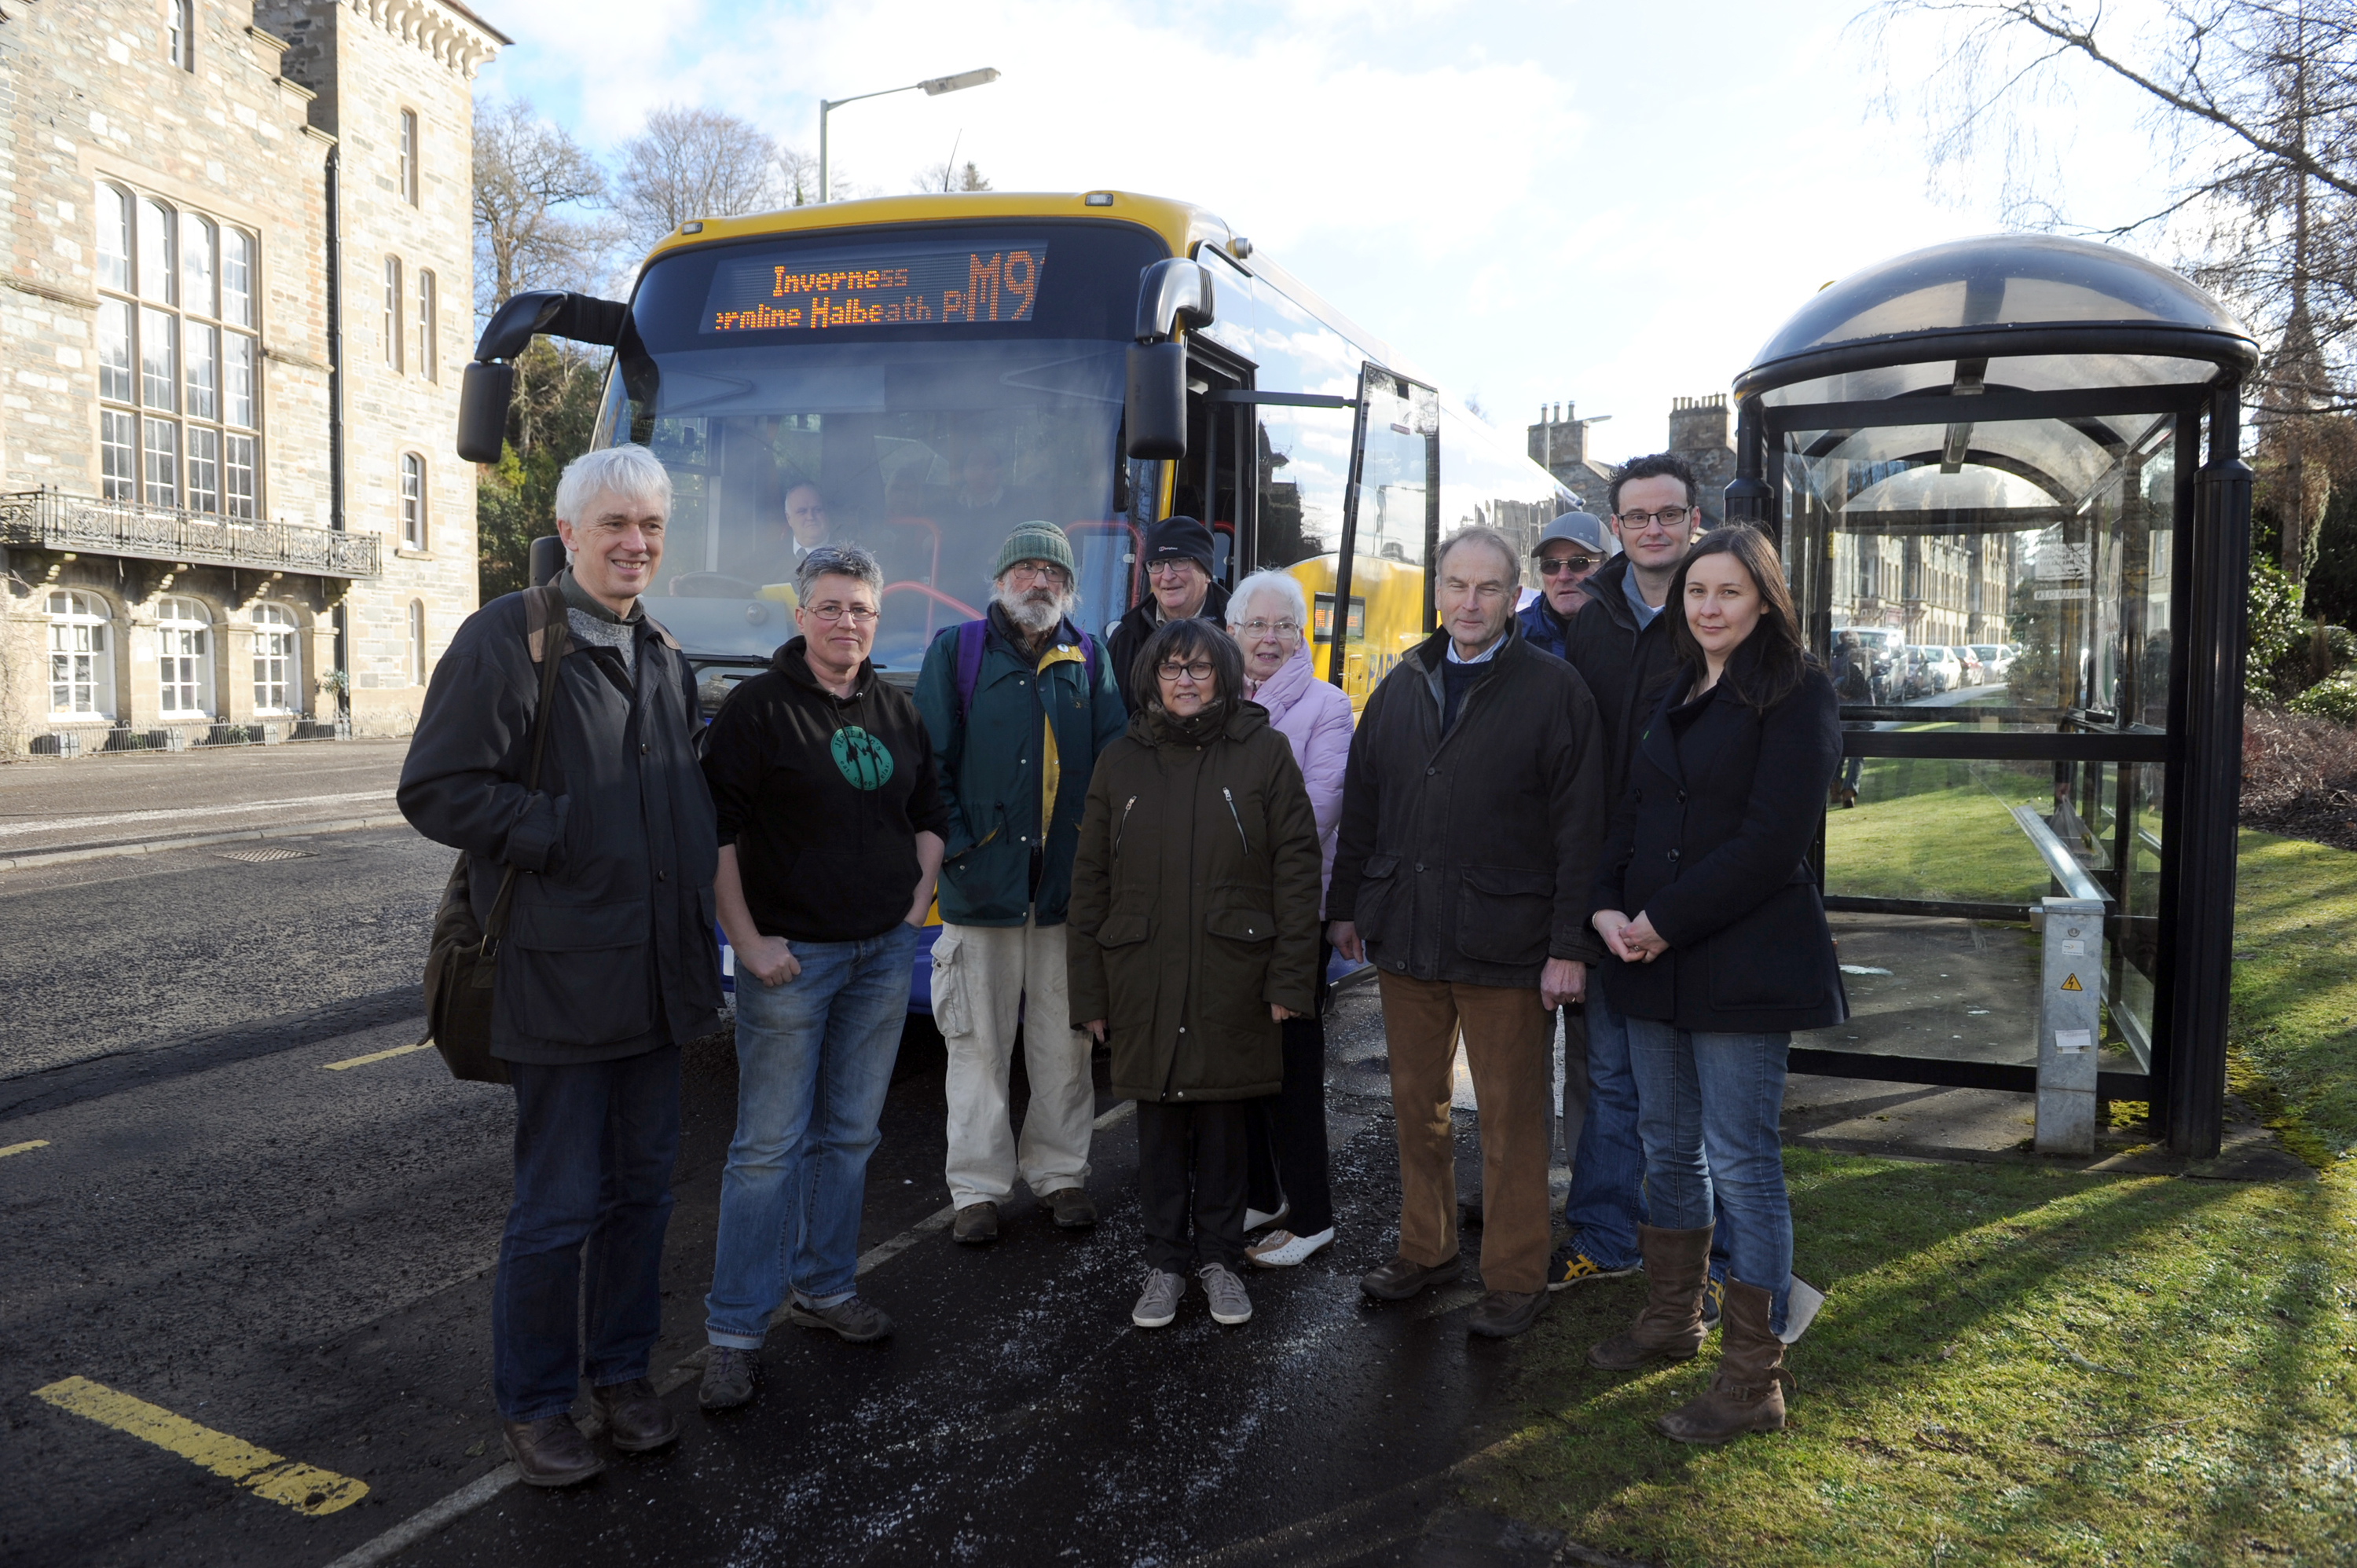 Pictured at the bus stop in Birnam are some of the local residents who have launched a petition to 'save Birnam buses' after they were severely cut back by Citylink to just one a day - l to r - Dave Roberts, Dot Mechan, Angus Hardie, Alan McKean, Laureen Merriman, Margaret Douglas, Jim Kirkland, Michael Anderson, Philip Merriman and Jess Pepper.